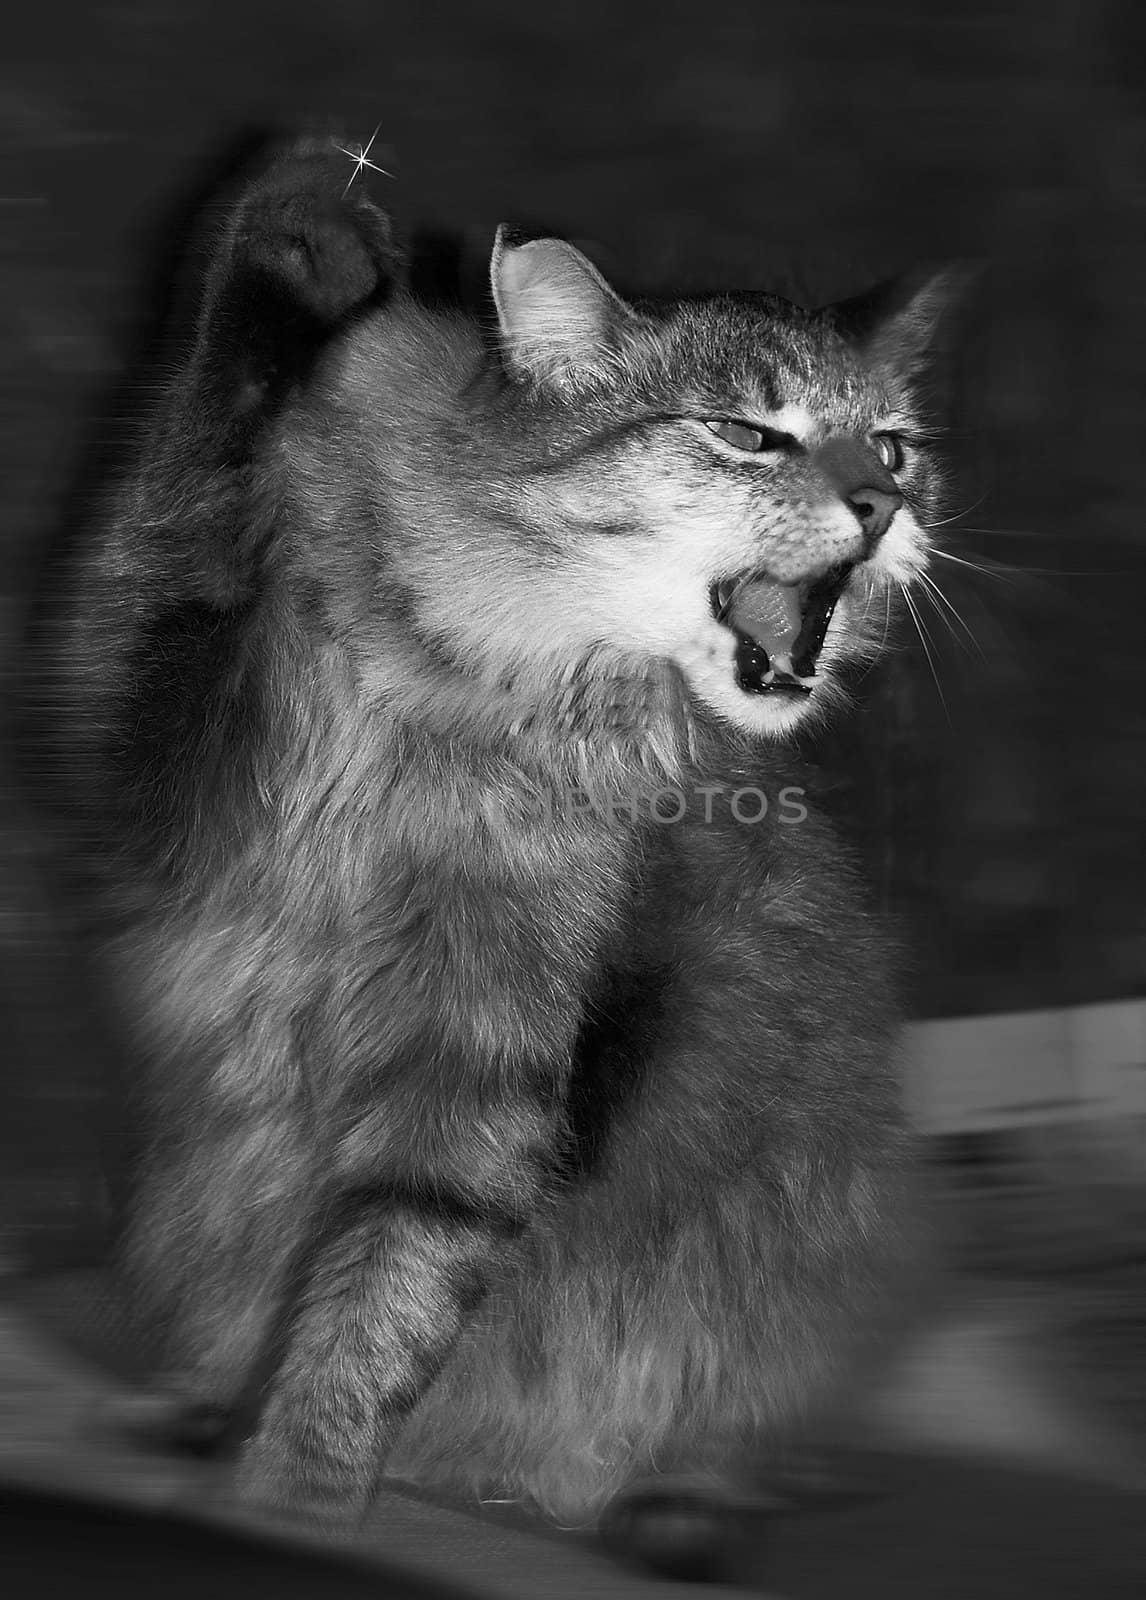 Attack or playing siberian cat. Black-and-white foto